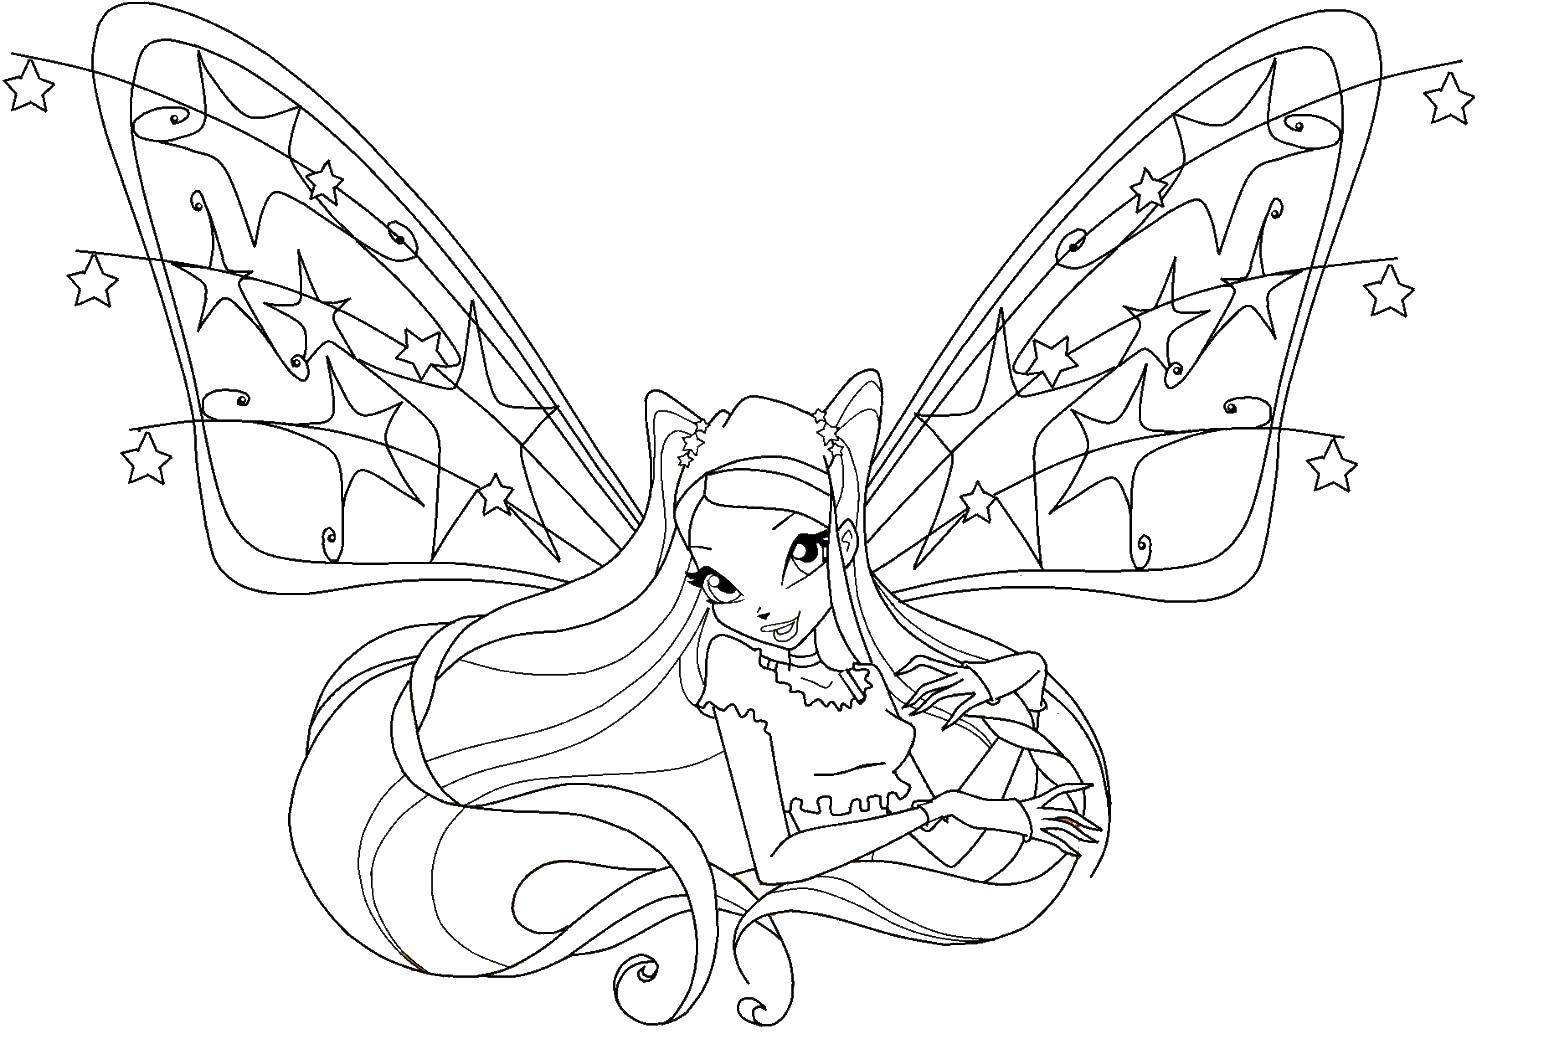 Coloring Fairy winx. Category Winx. Tags:  fairies, the winx girls.